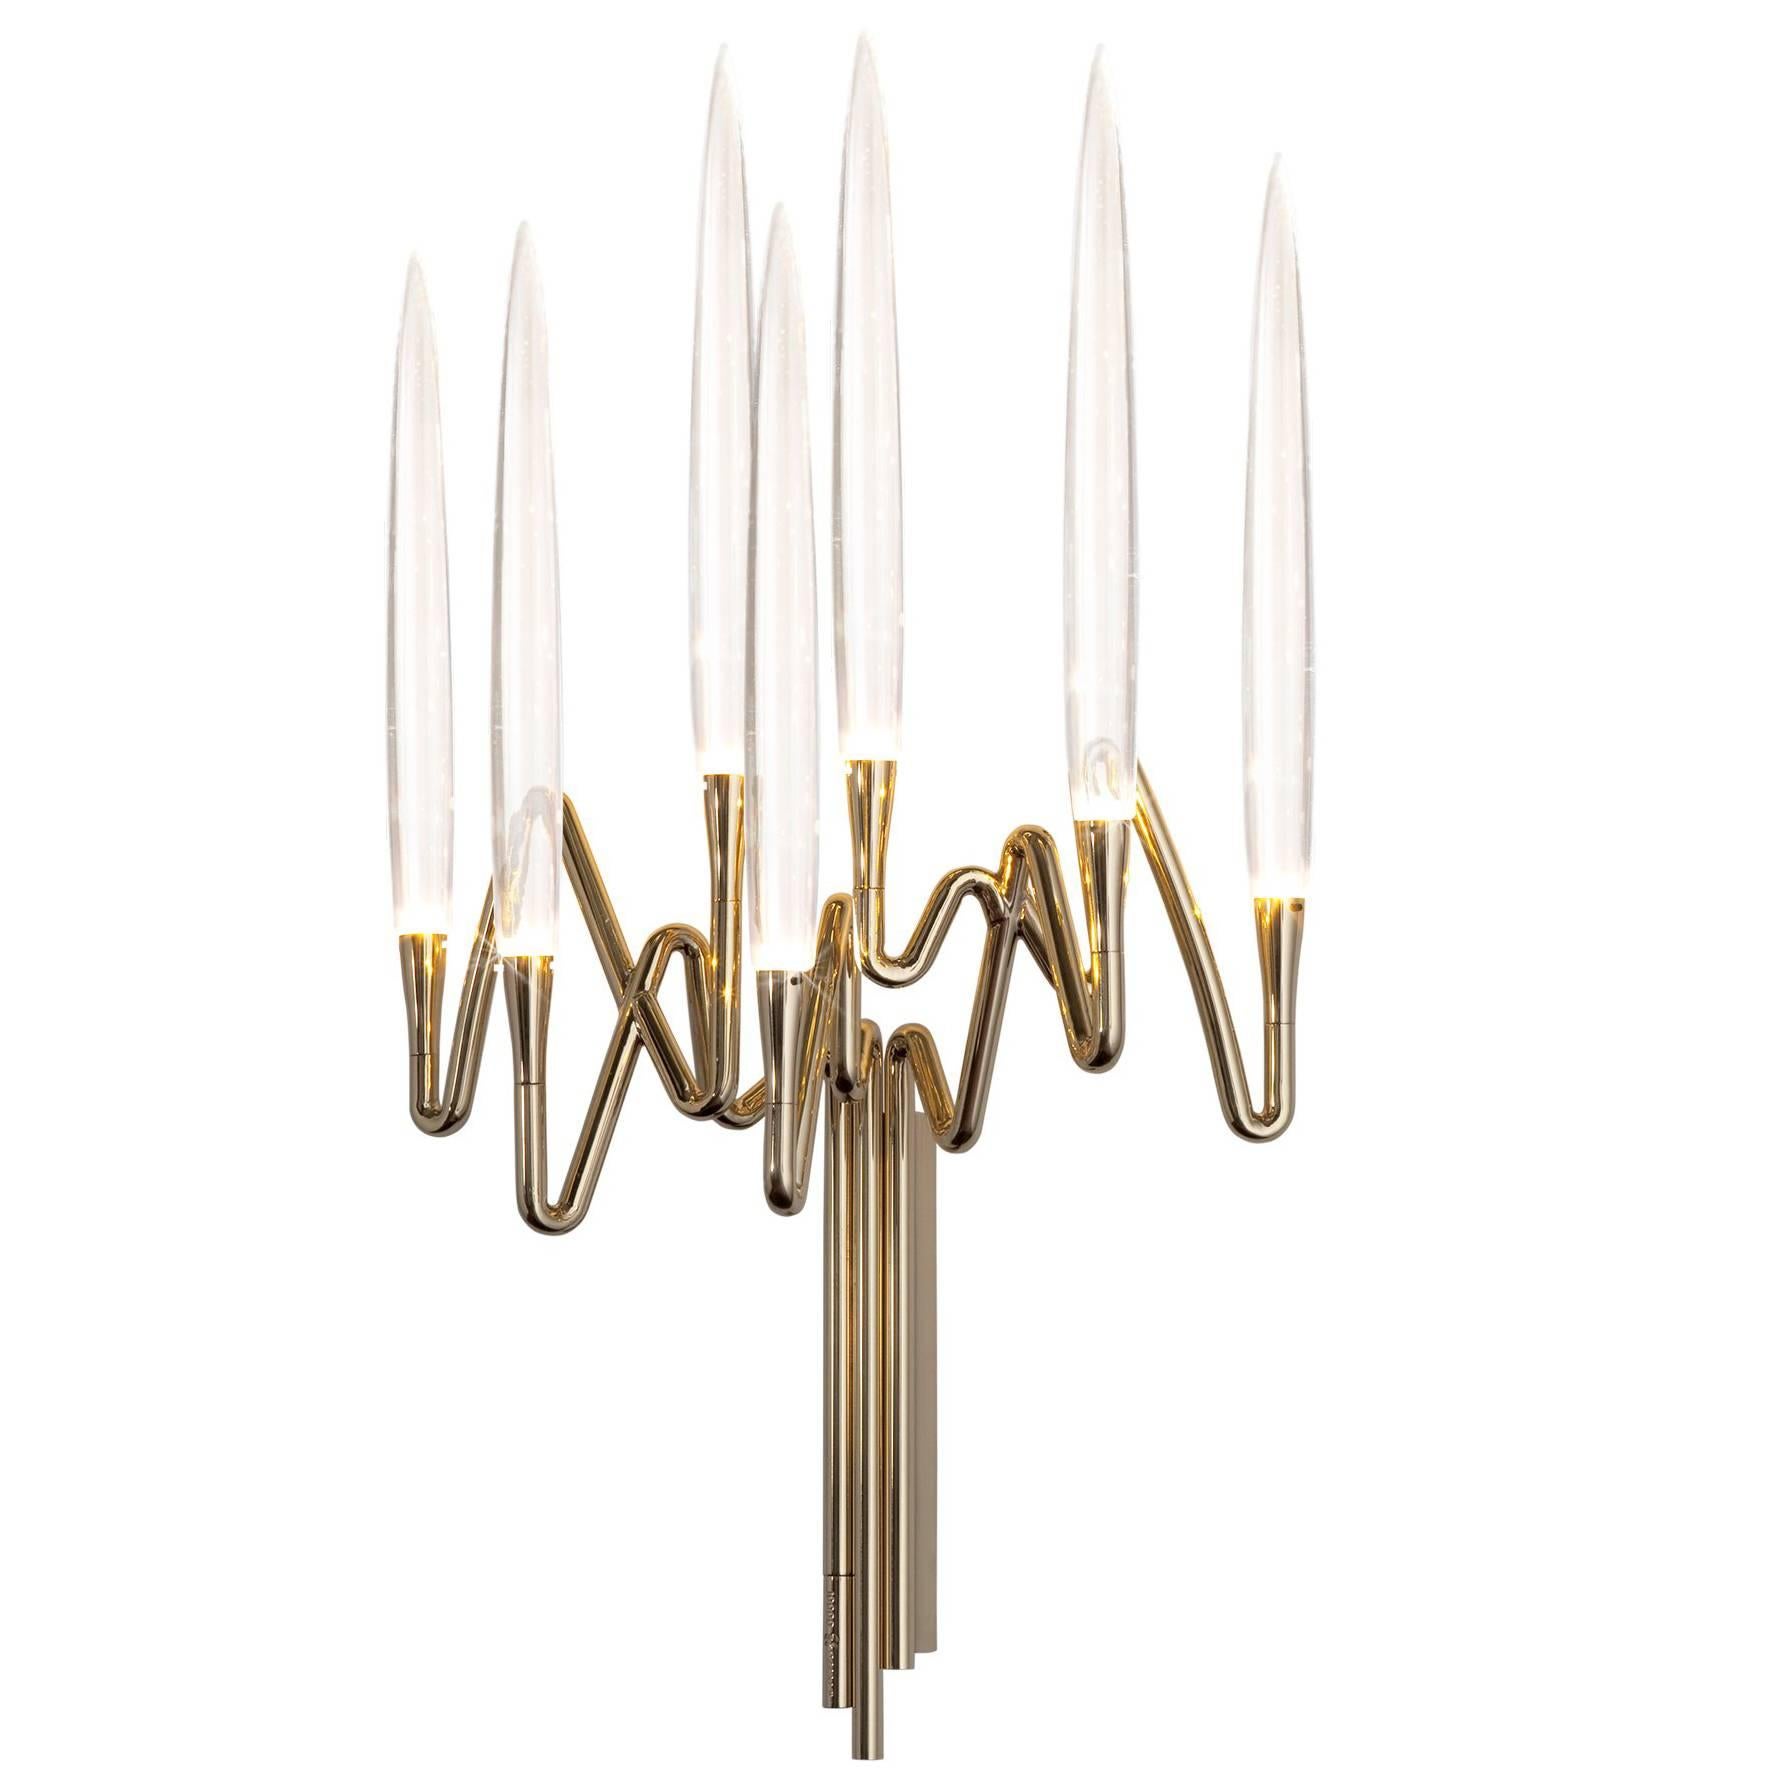 "Il Pezzo 3 Wall Sconce" LED wall lamp in gold plated brass